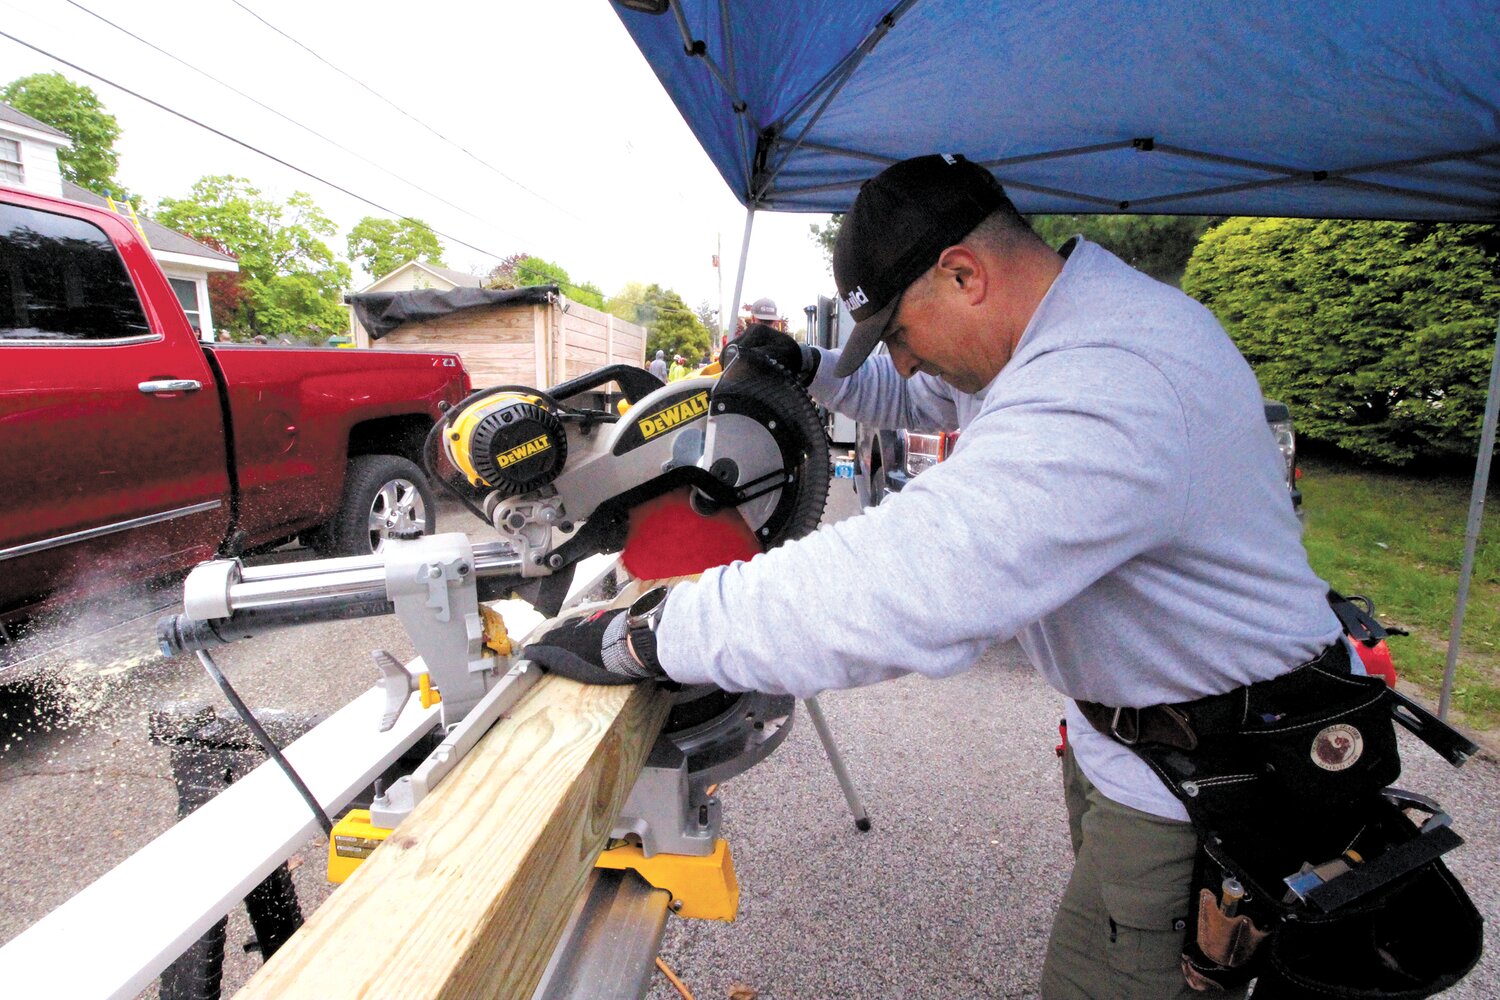 THE RIGHT TOOLS: Chris Sullivan, owner of Hilton Home Improvement brought his truck and a tent to set up an onsite shop to make repairs.